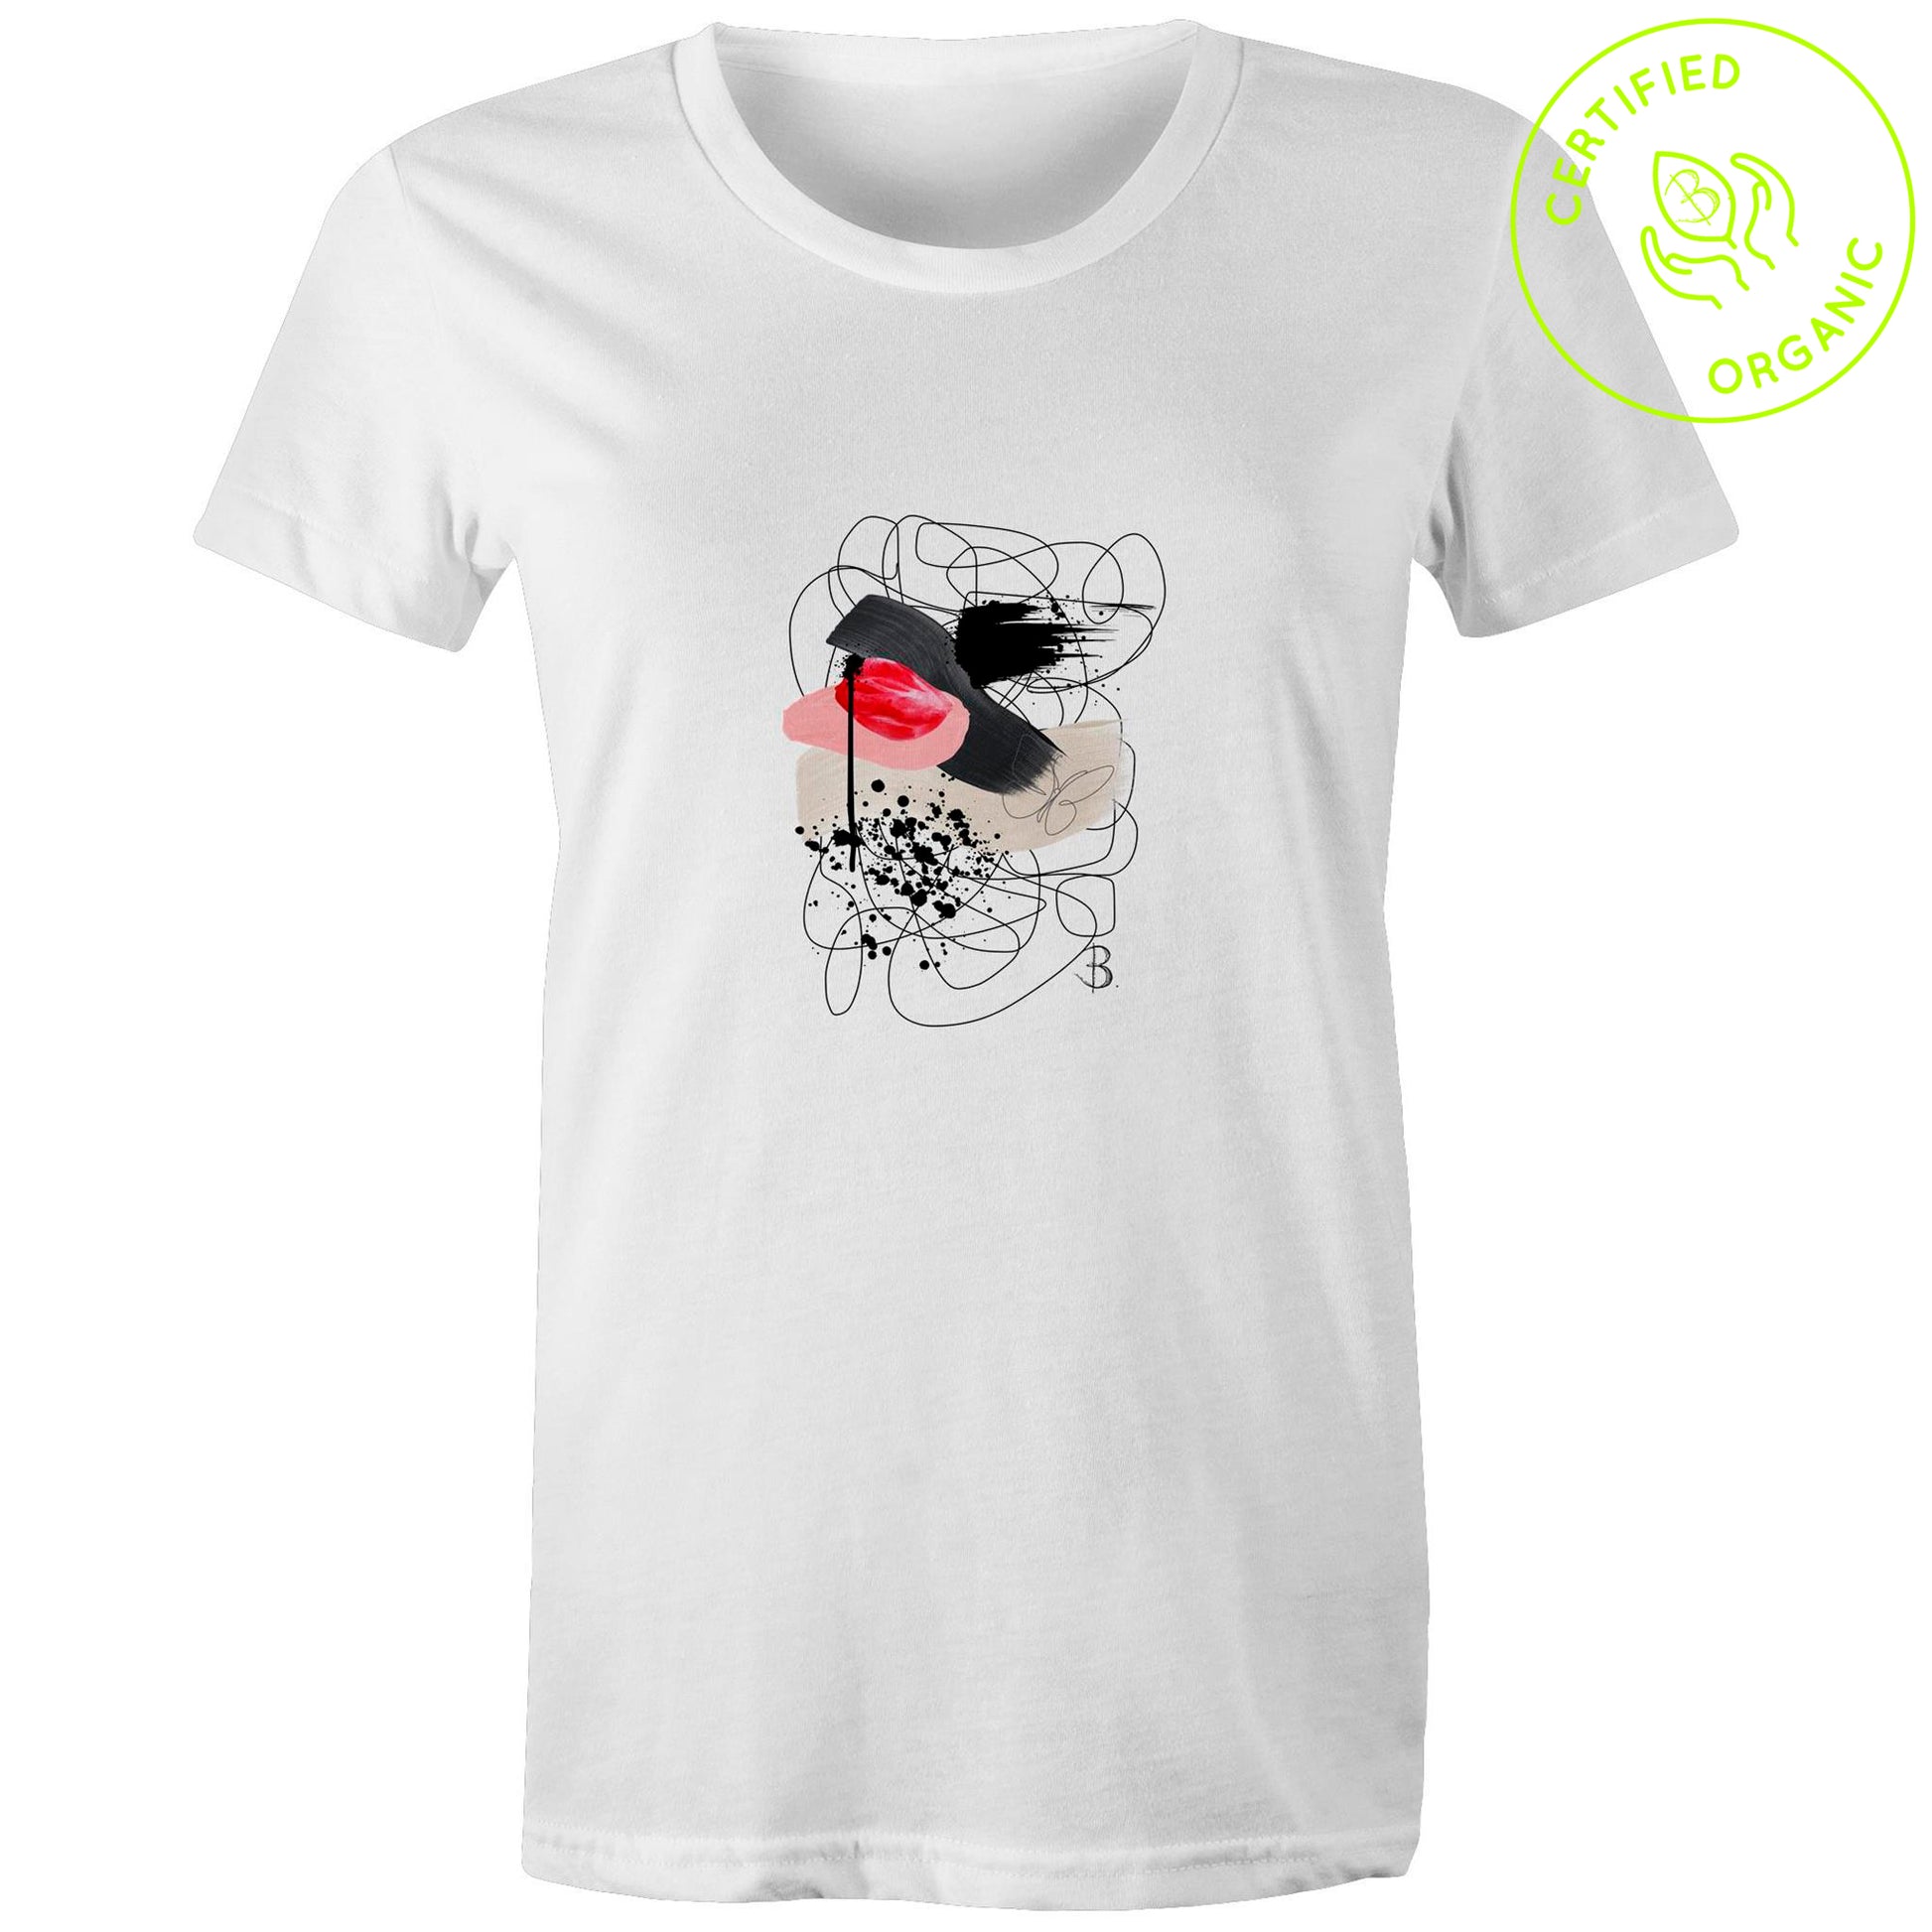 'Swatch Pink Women's Organic Tee' Front Print Design, B. Streetwear™ by Bridget Bradley. Chic certified Organic 100% Cotton Luxe T-shirt. Find Your Size now.